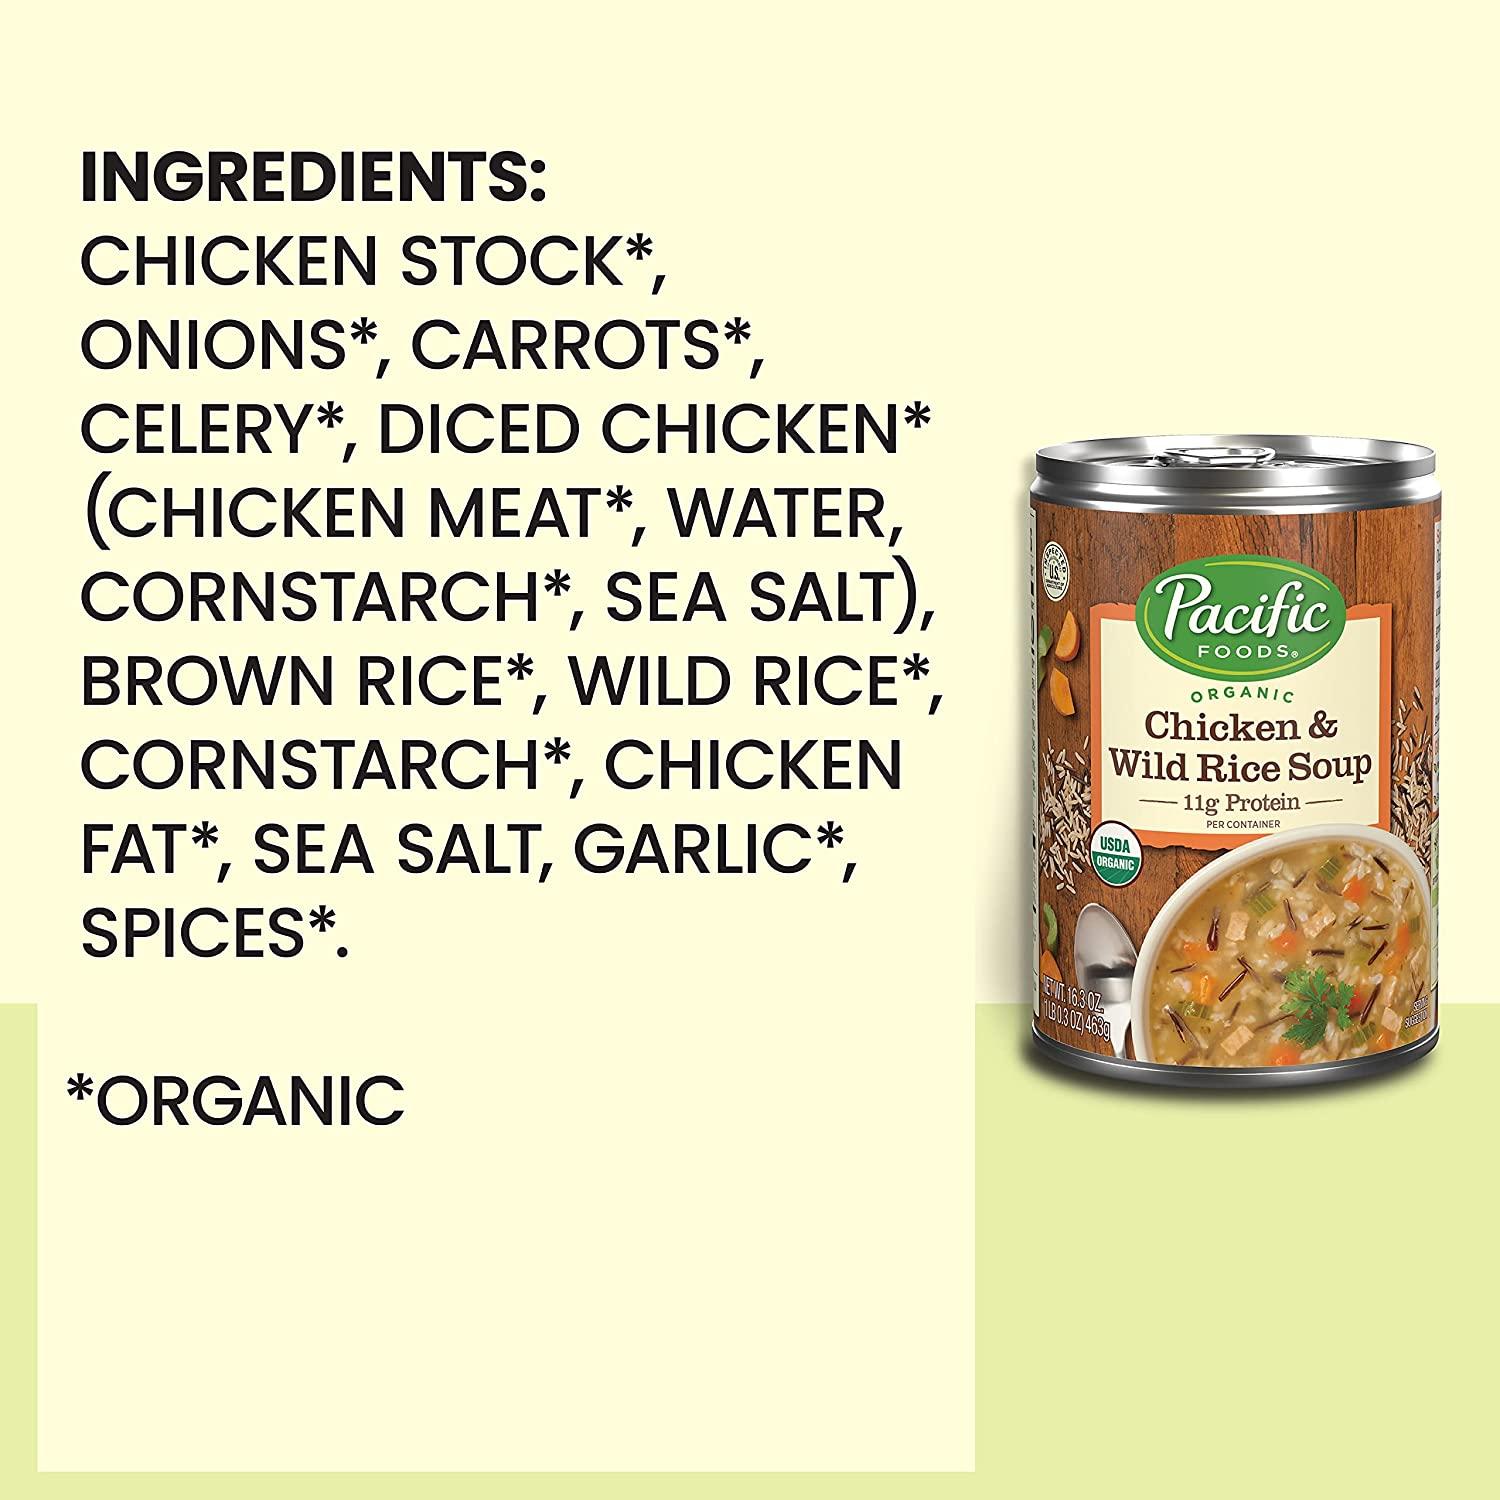 Pacific Foods Organic Wild Rice Chicken Soup, 16.3 Oz Can